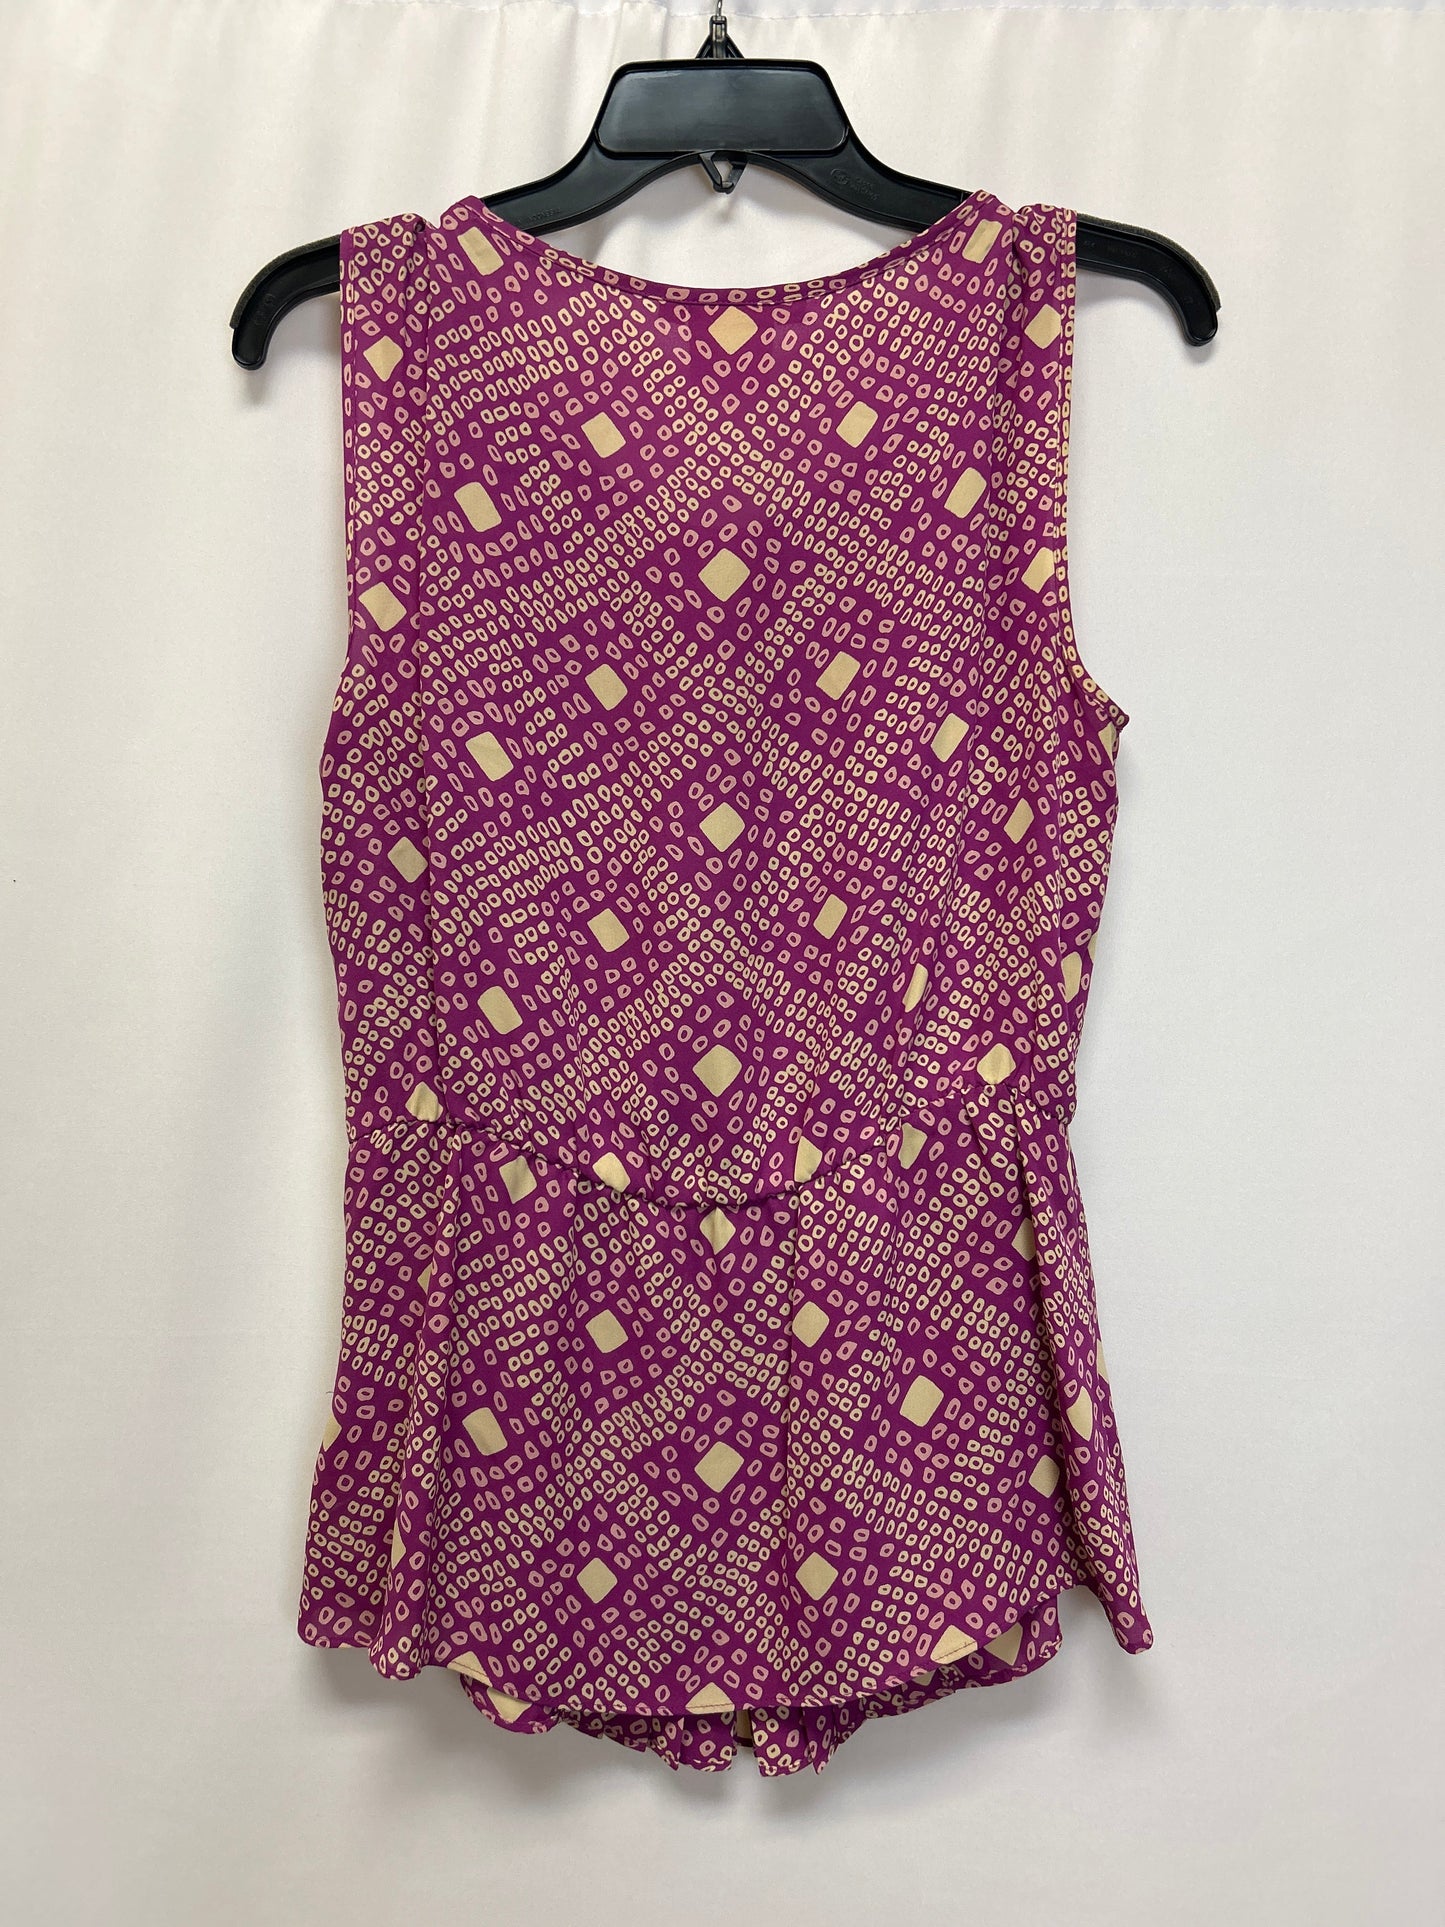 Top Sleeveless Designer By Tory Burch  Size: M